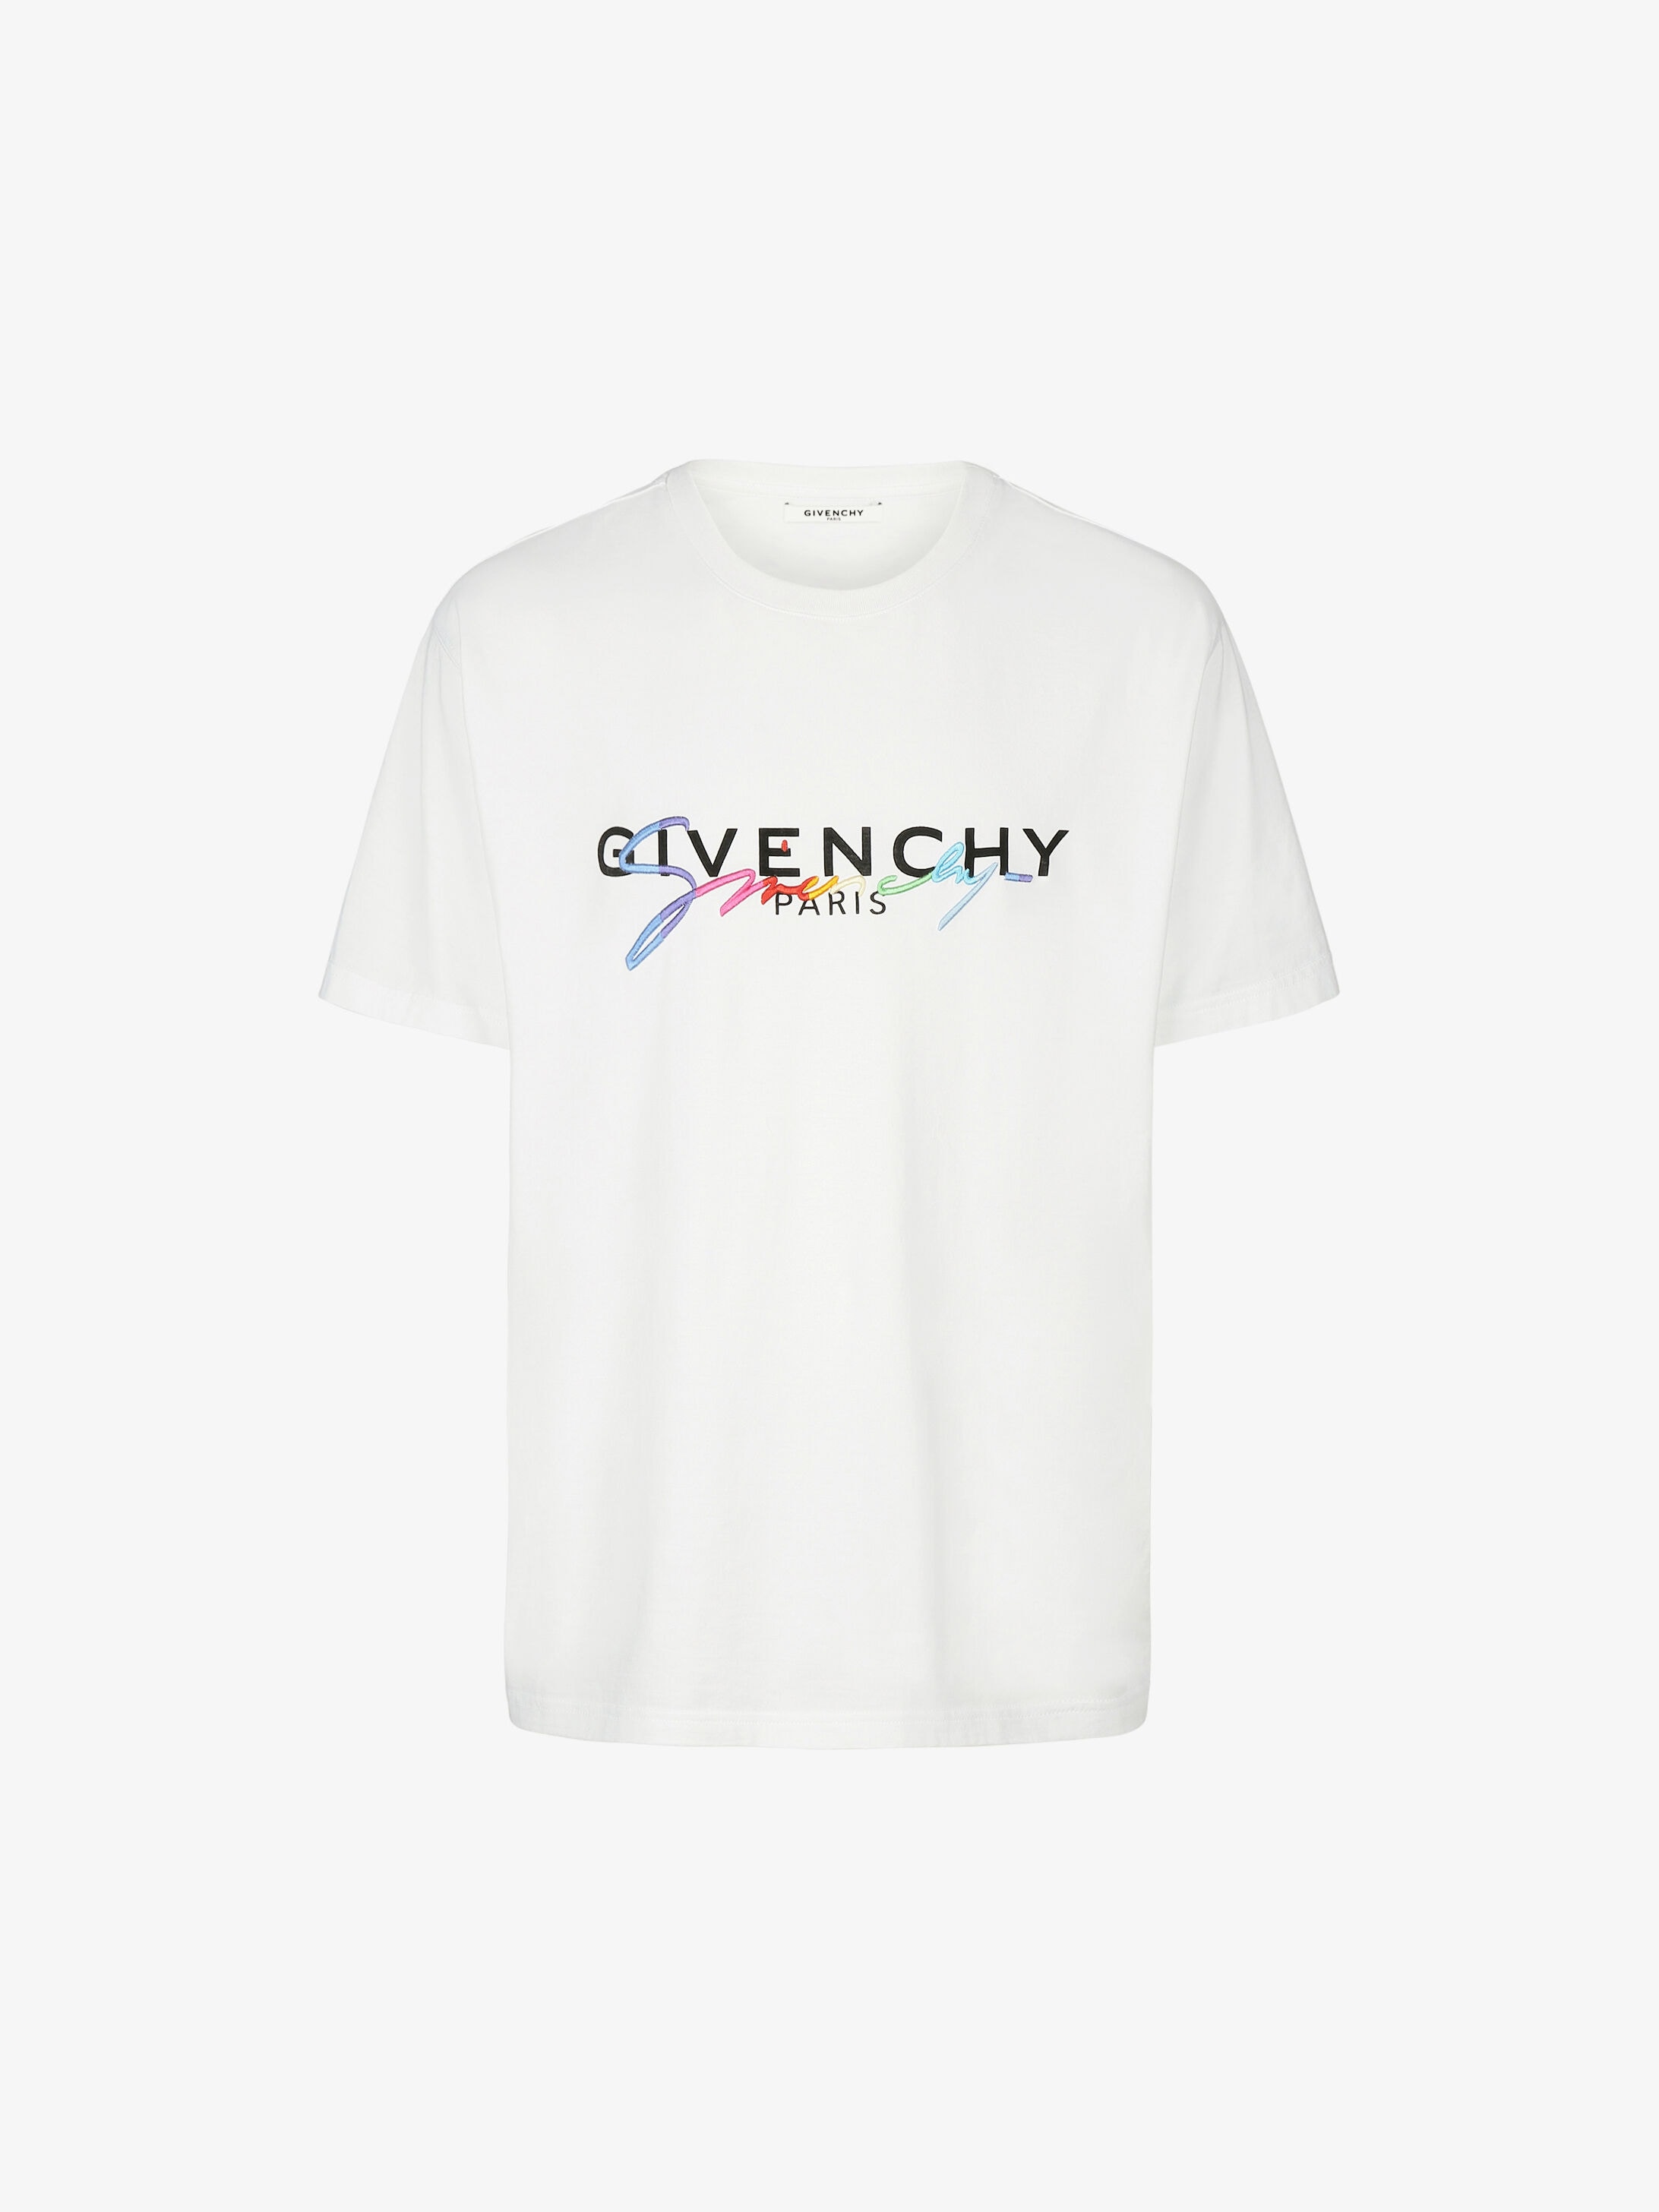 Givenchy Size Chart